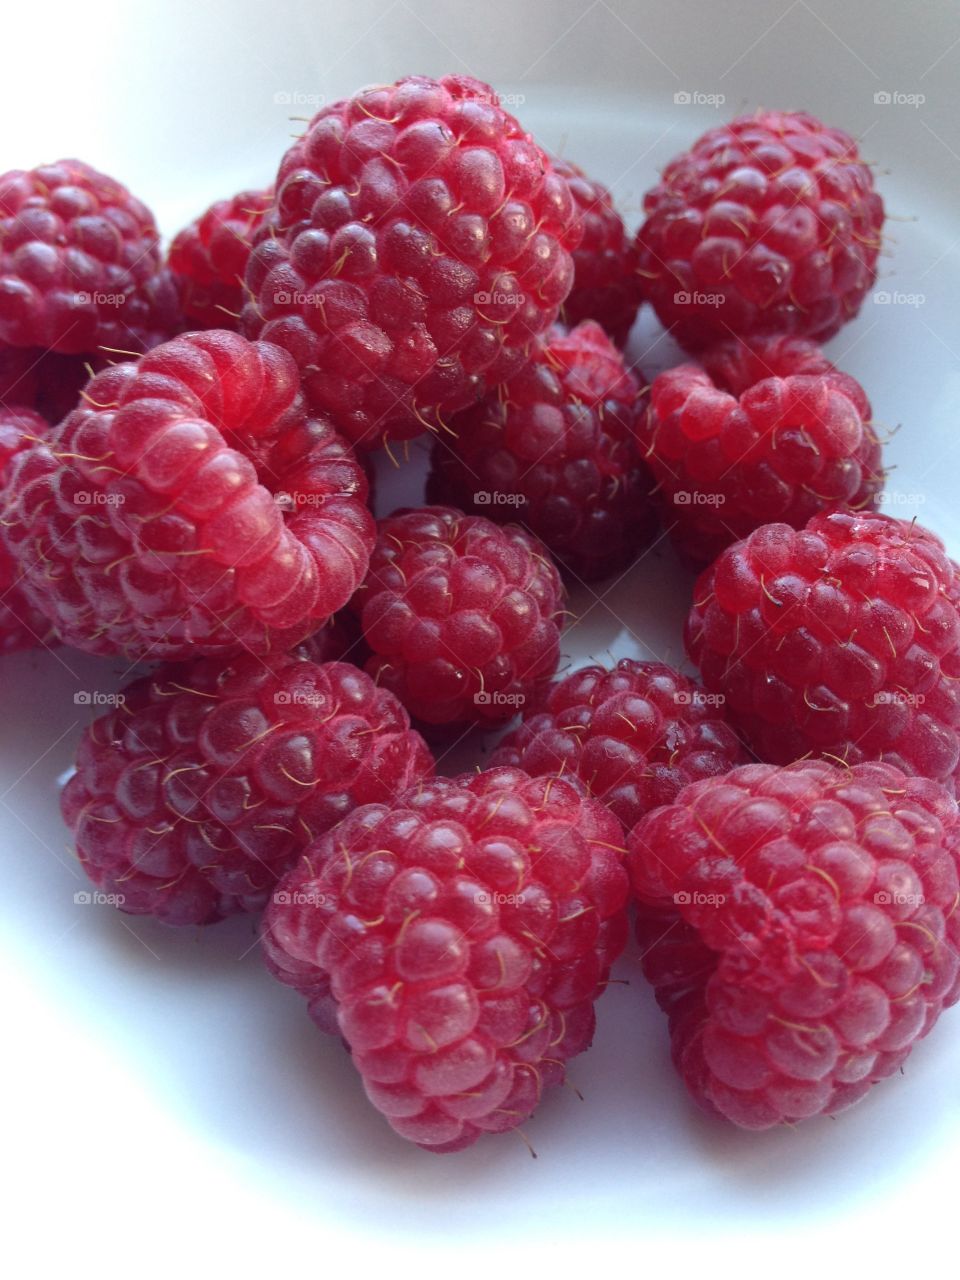 Raspberry in container